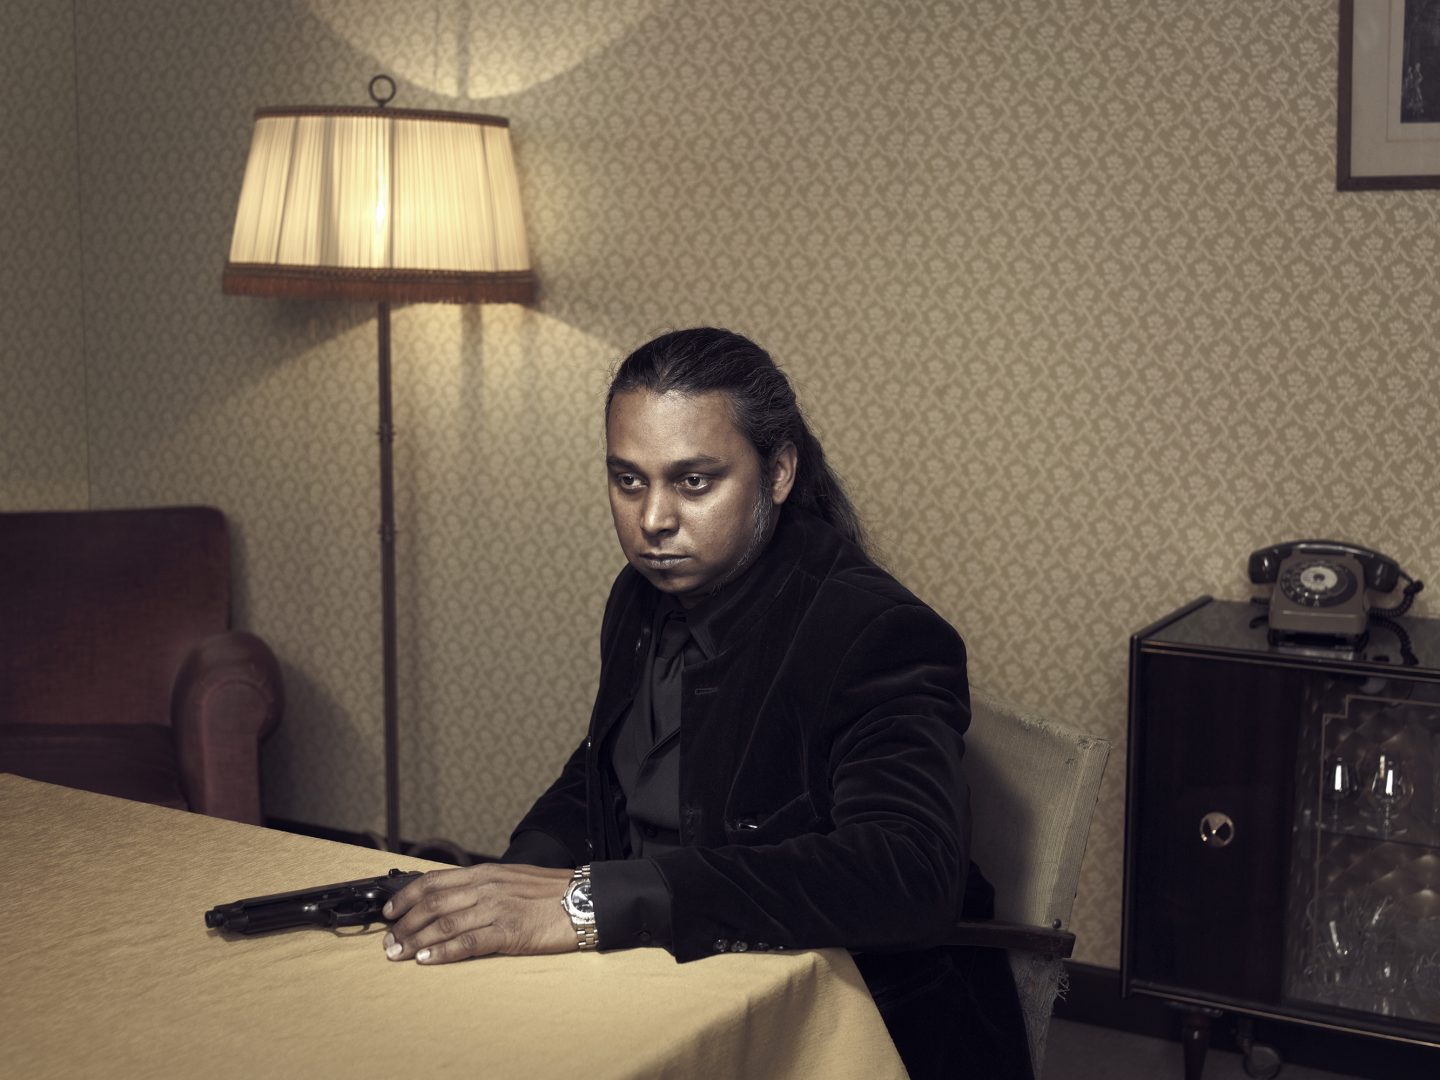 Man with gun sitting at table in room 42 by Stefan Rappo